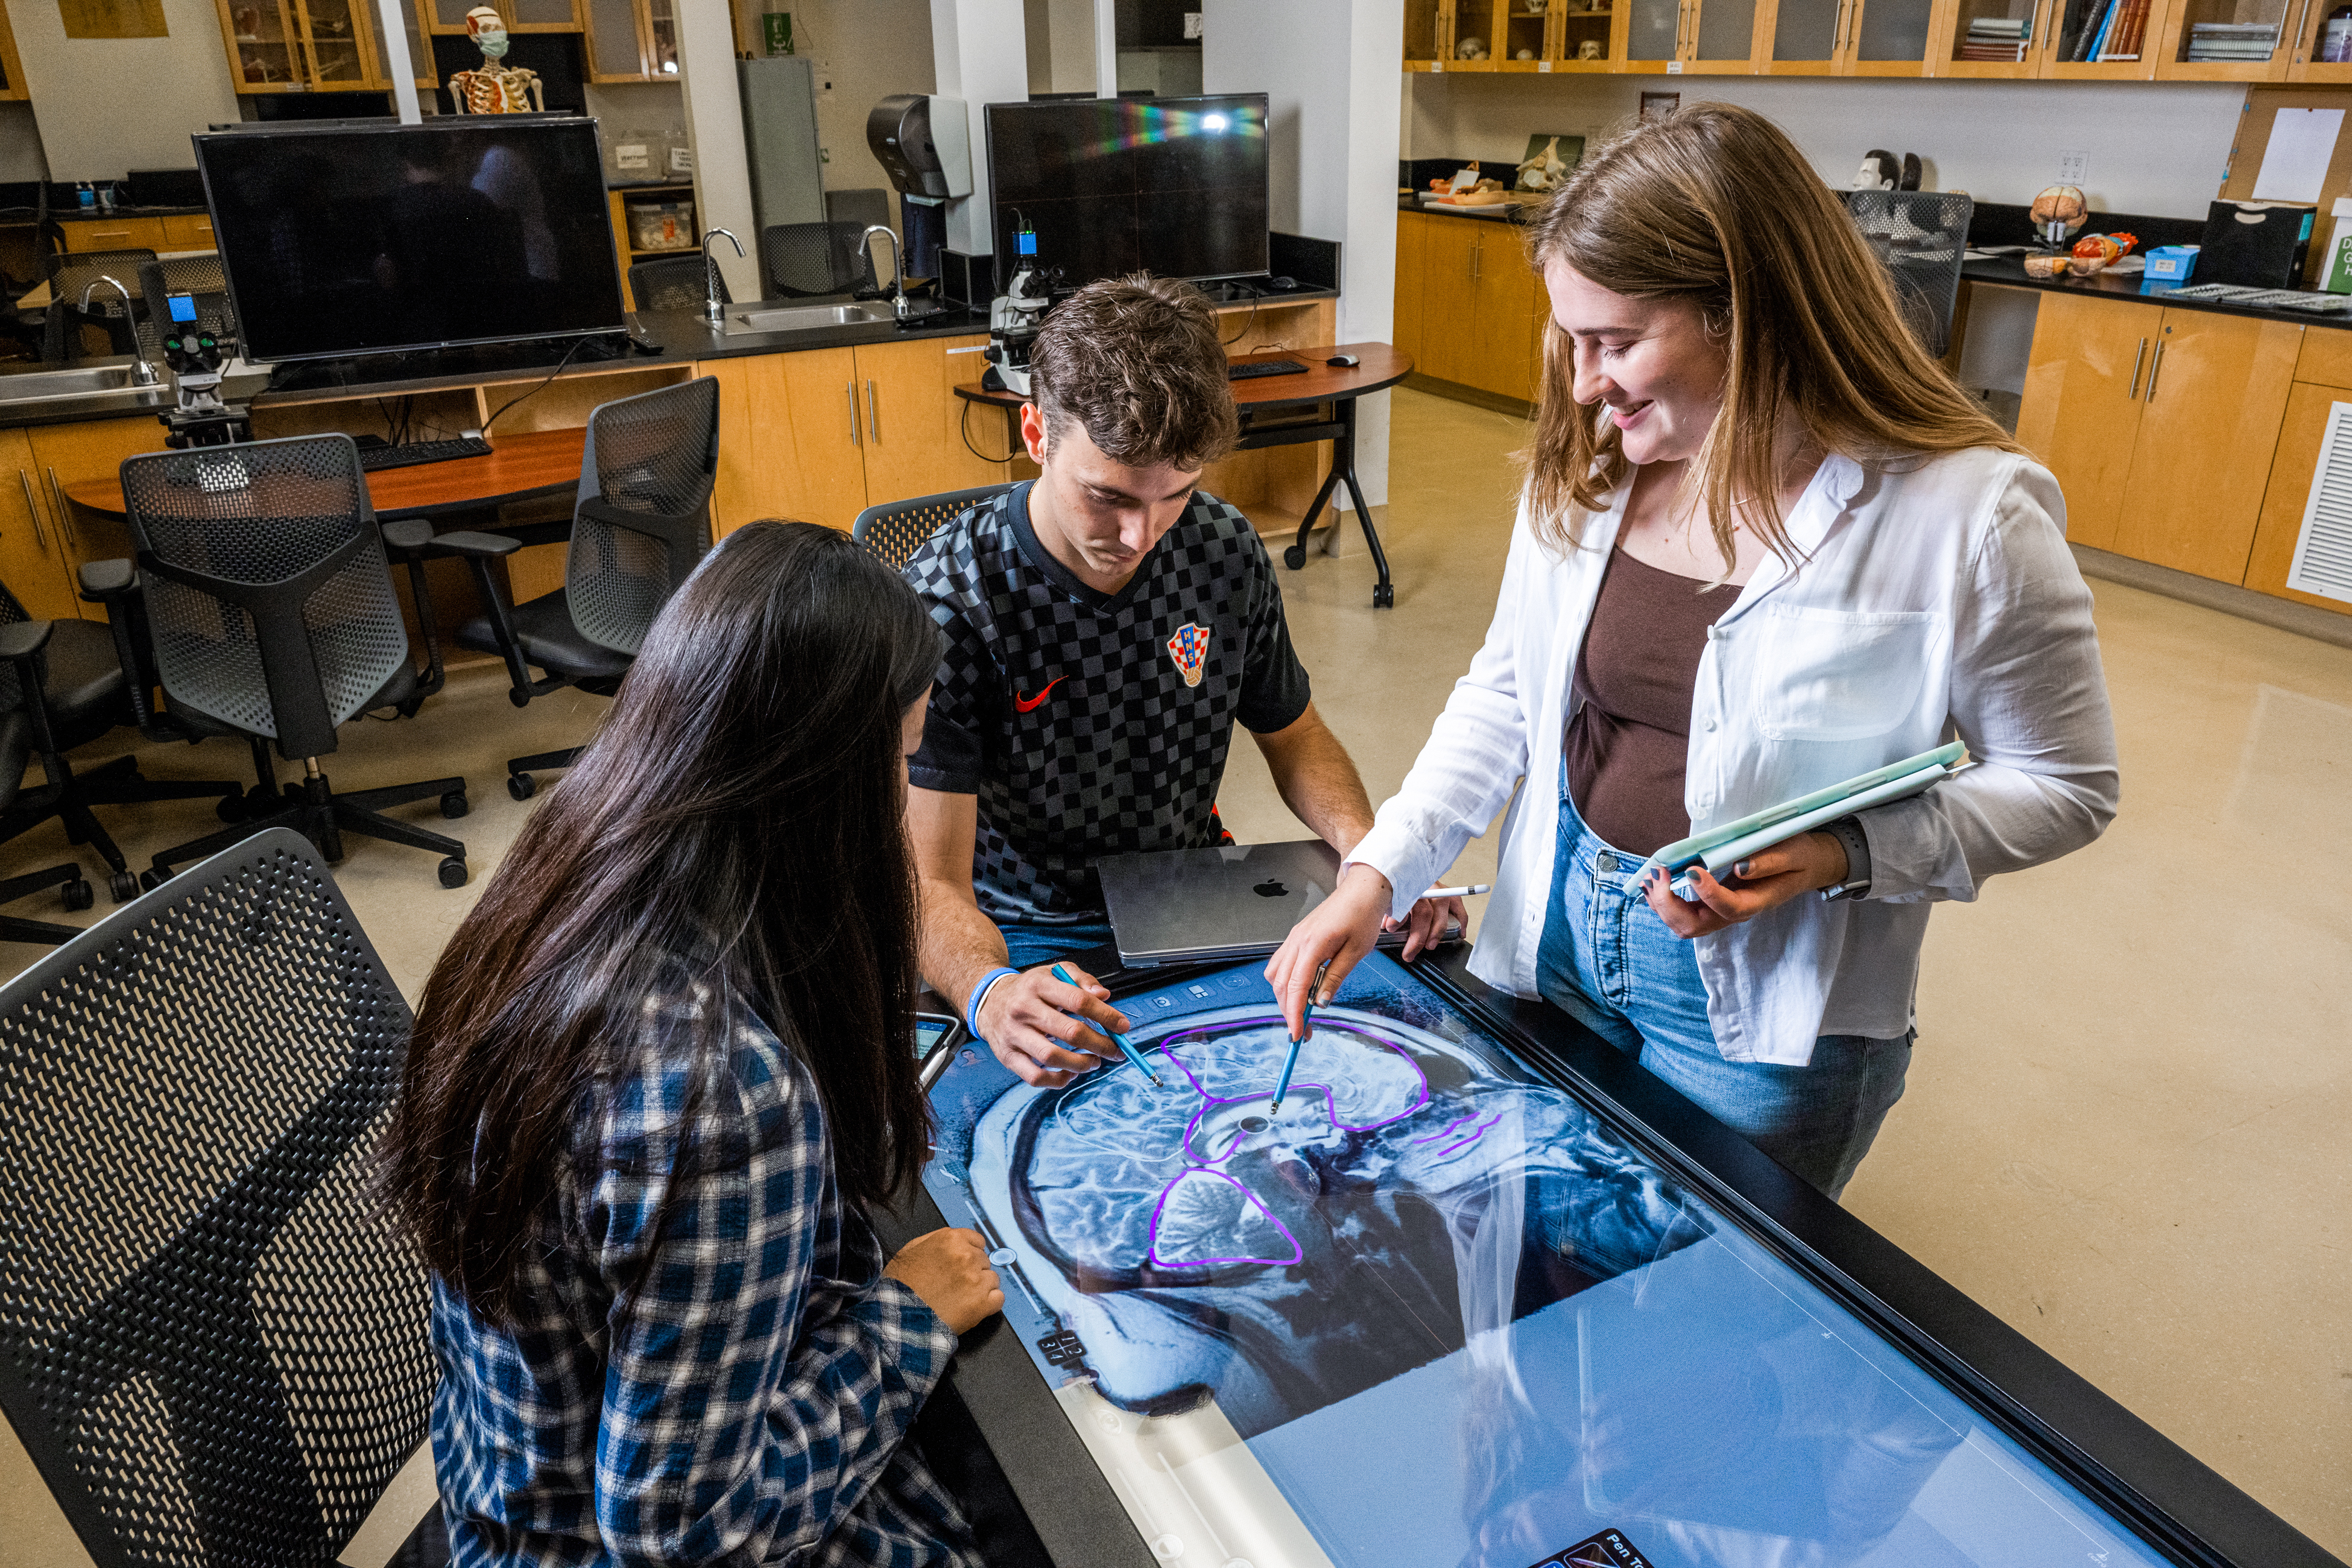 Students work together on interactive monitor showing brain scan